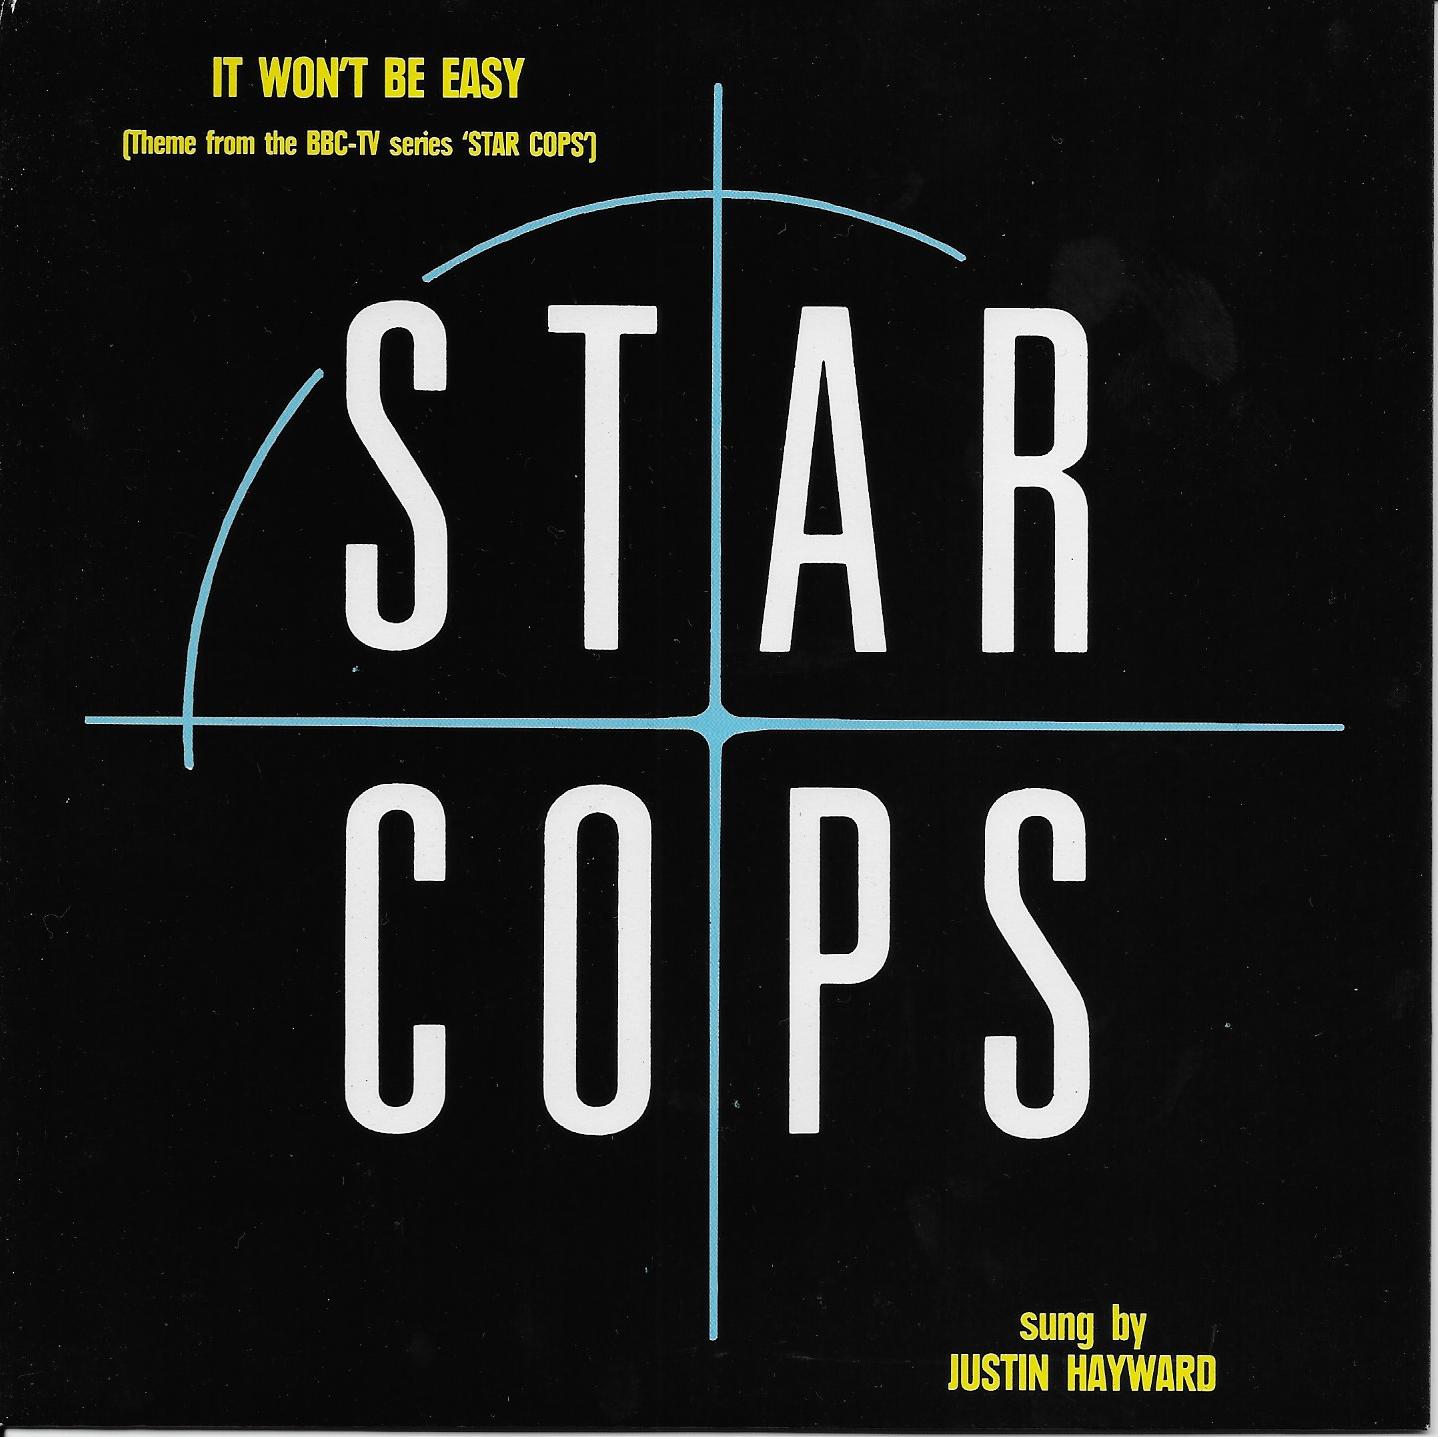 Picture of RESL 208 It won't be easy (Star cops) by artist Justin Hayward from the BBC records and Tapes library